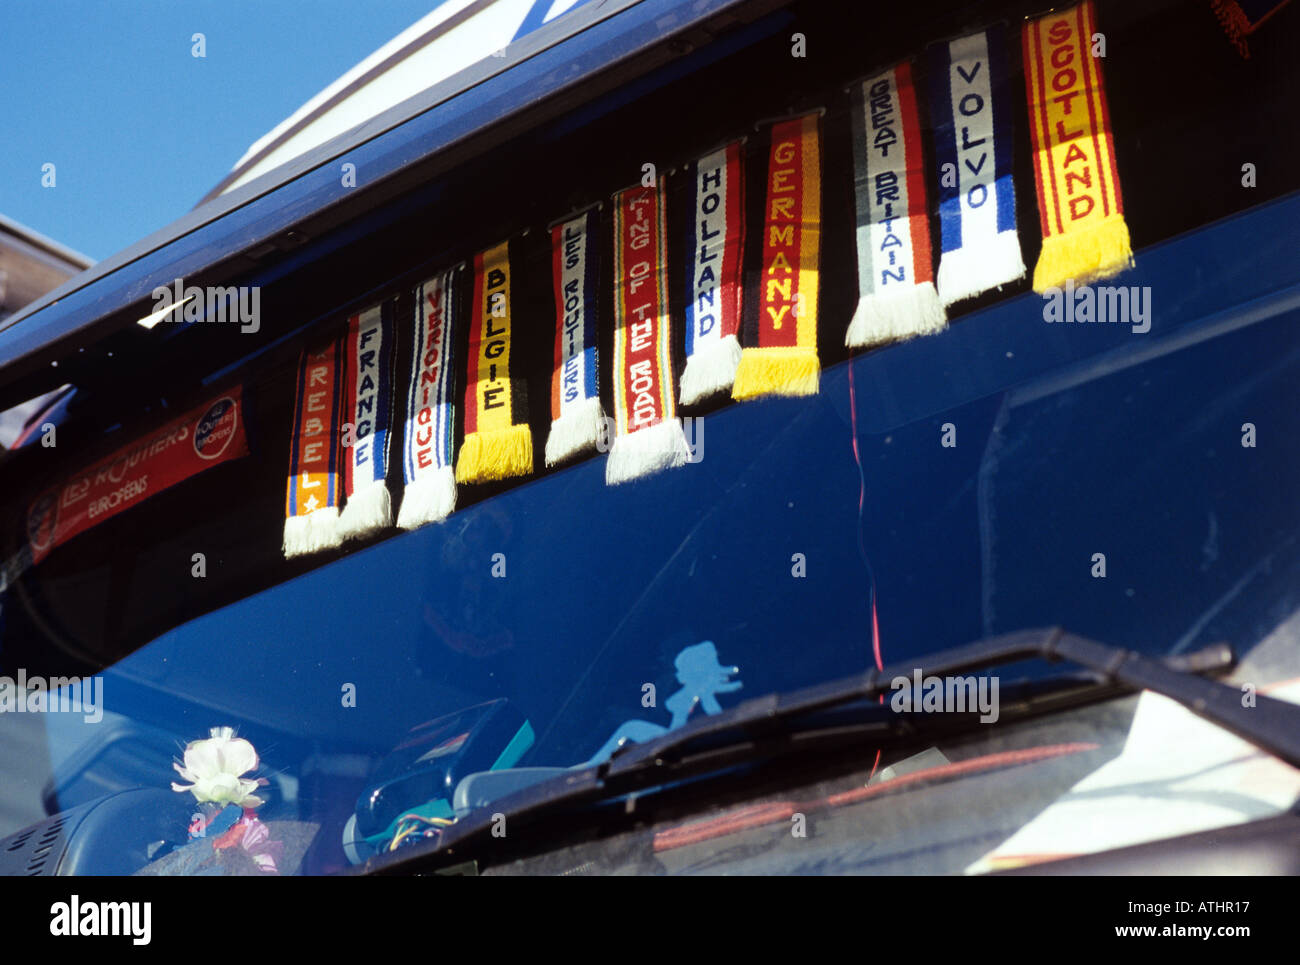 Banners in lorry drivers cab. Stock Photo